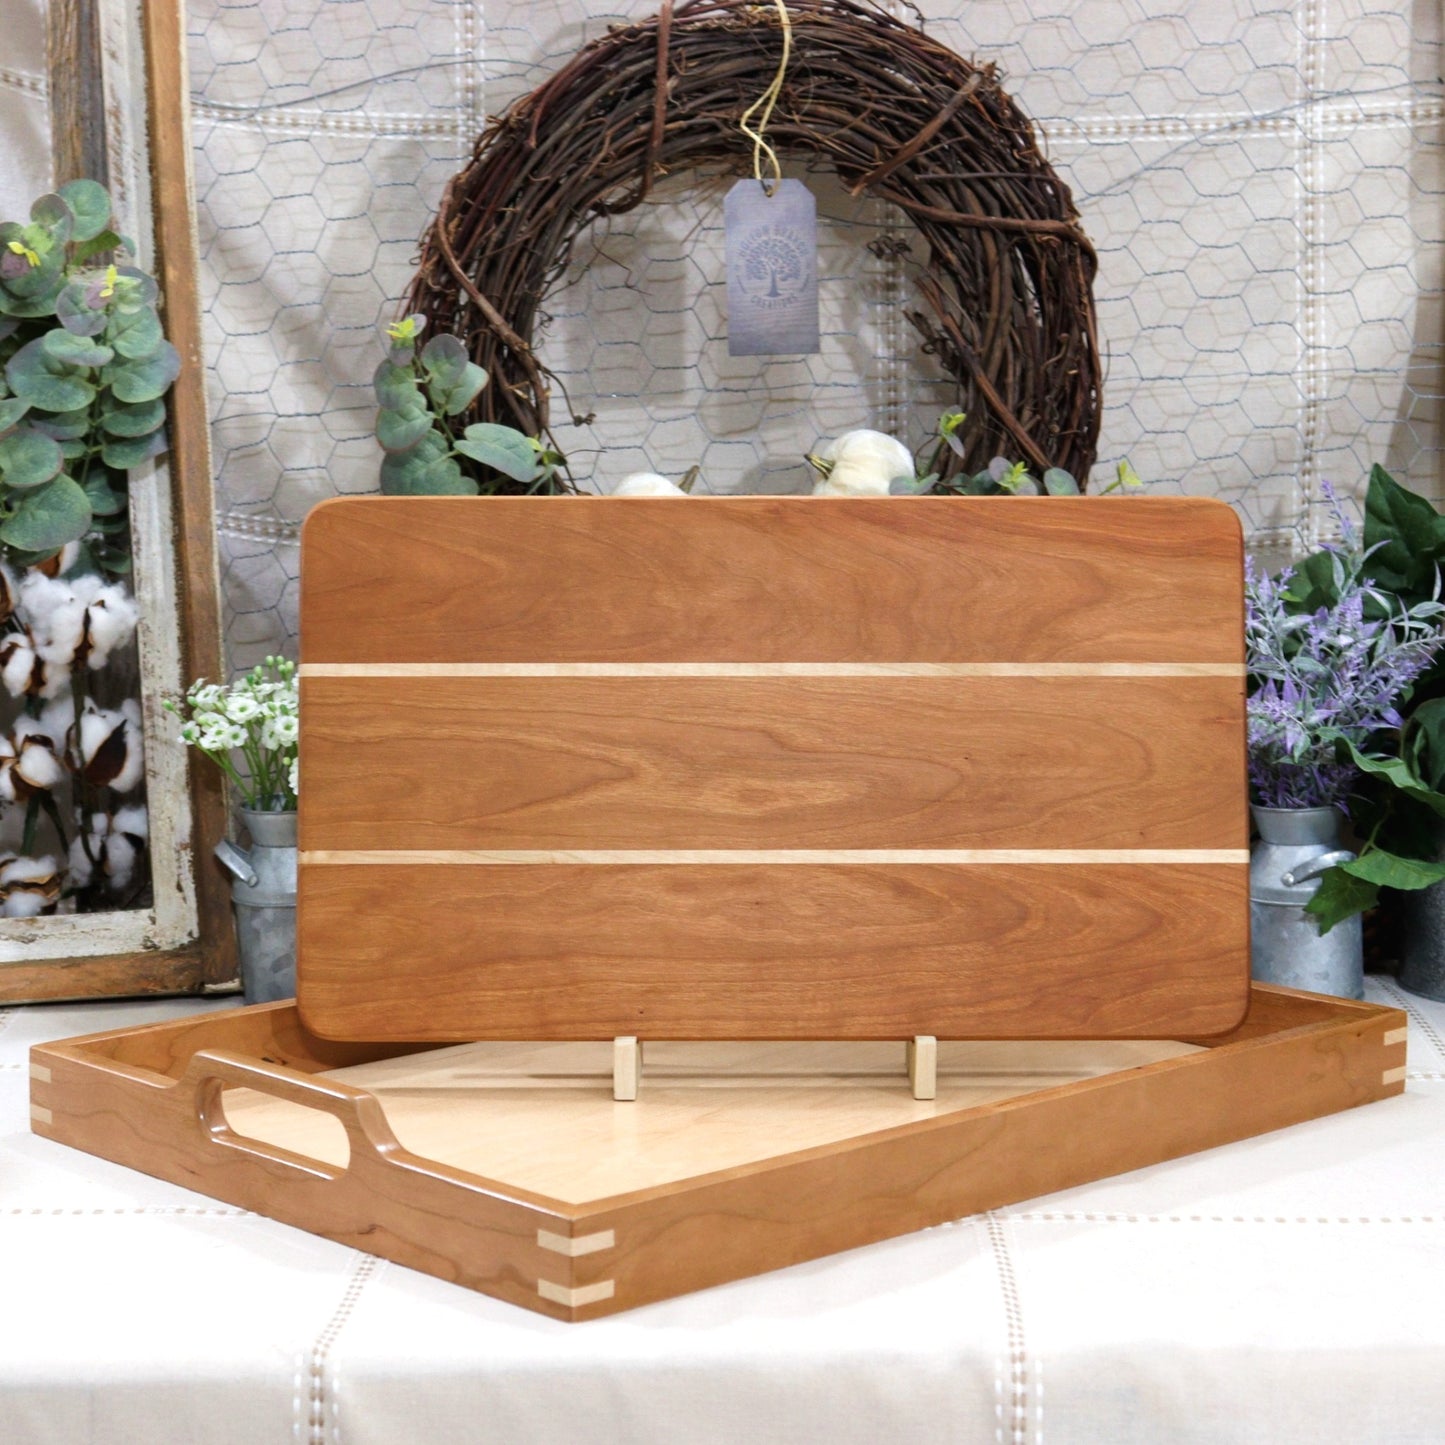 2-Piece Cherry Wood Cutting Board & Serving Tray with Handles: Serving Set